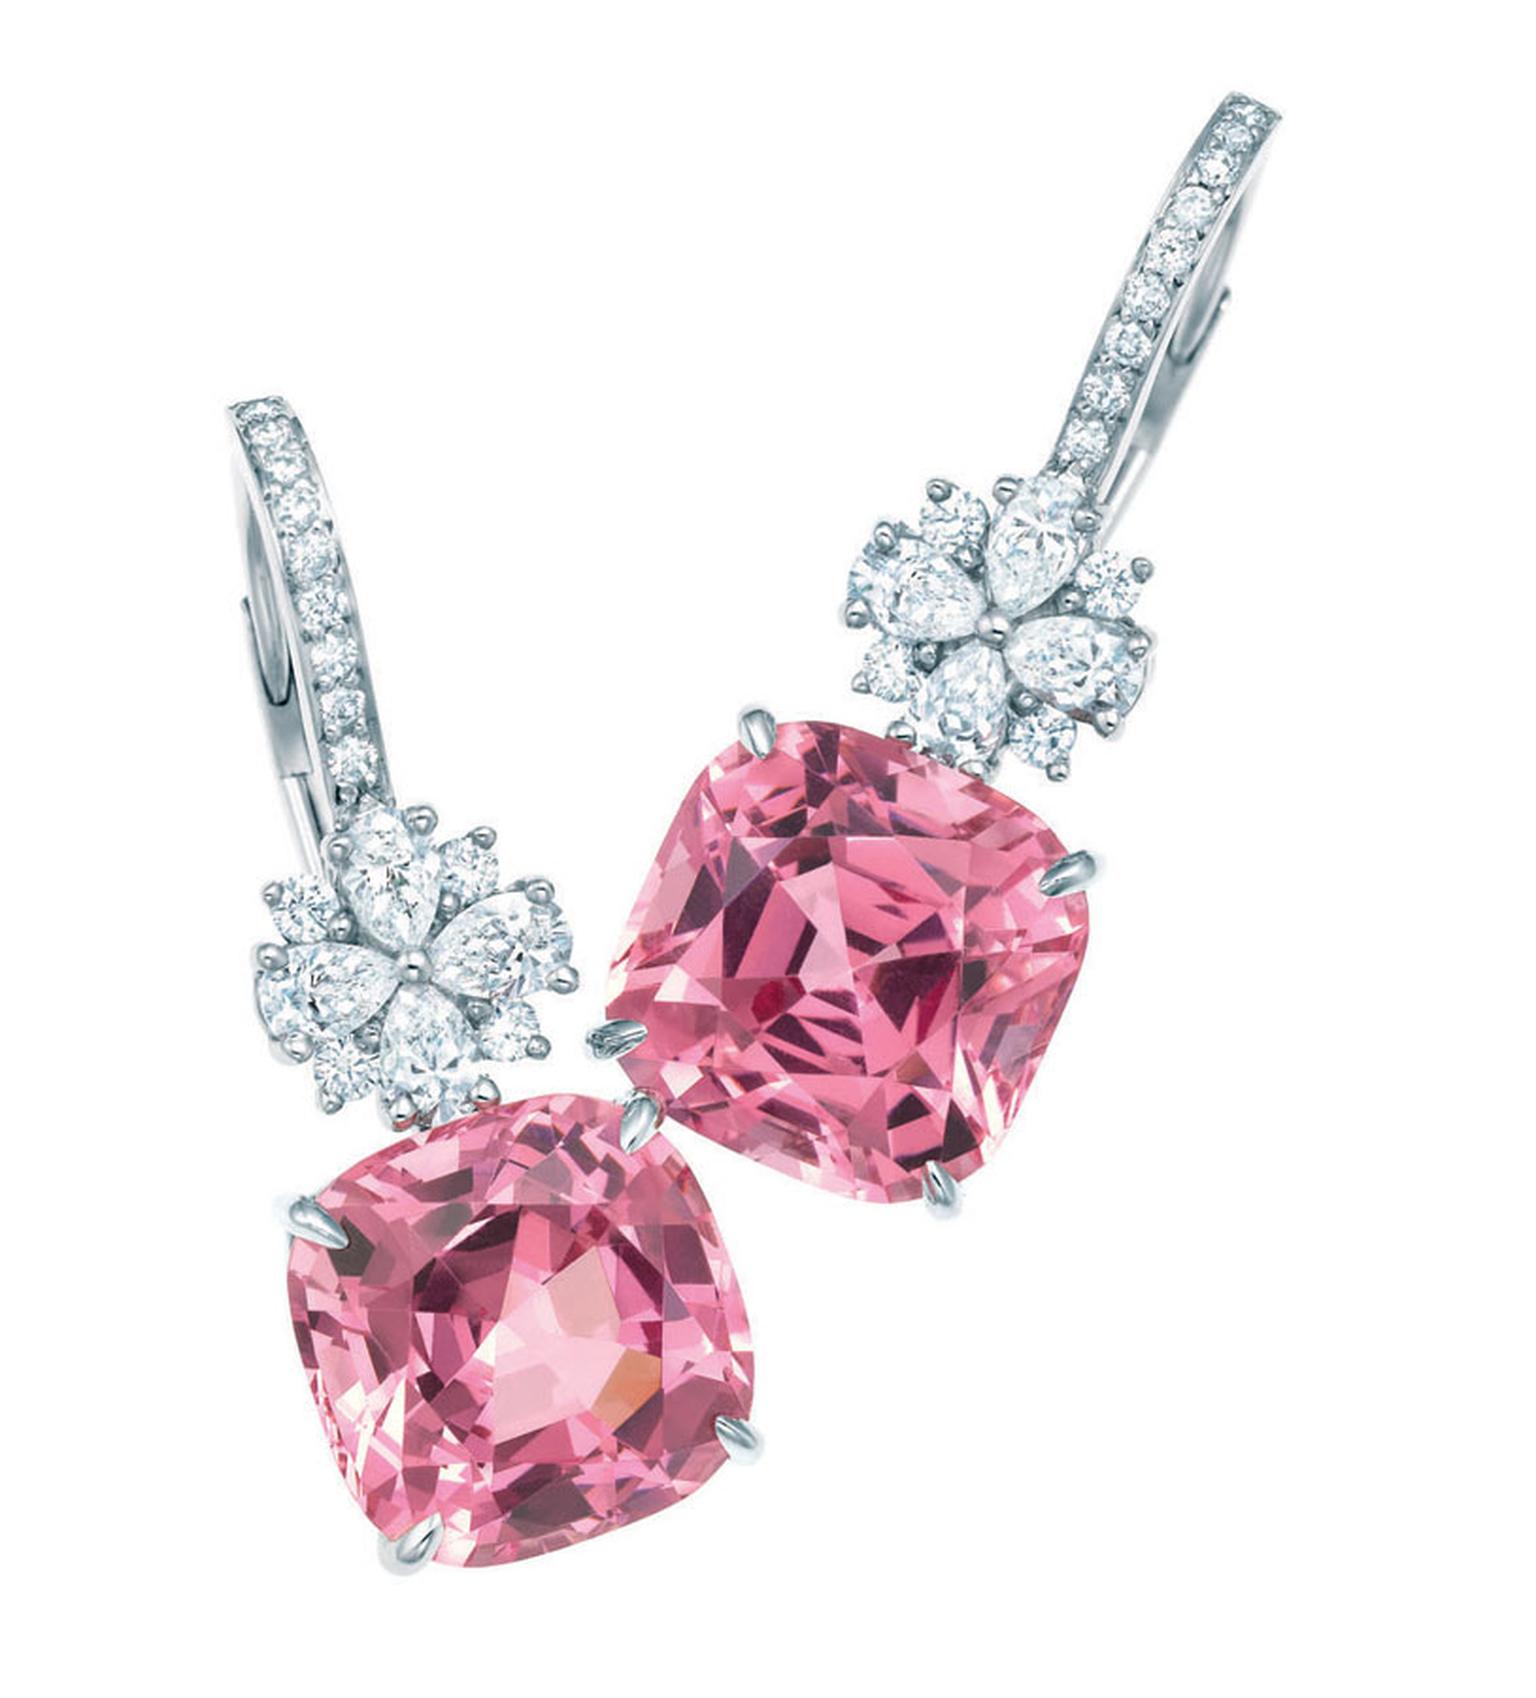 Tiffany Pink spinel and diamond earrings in platinum 38700